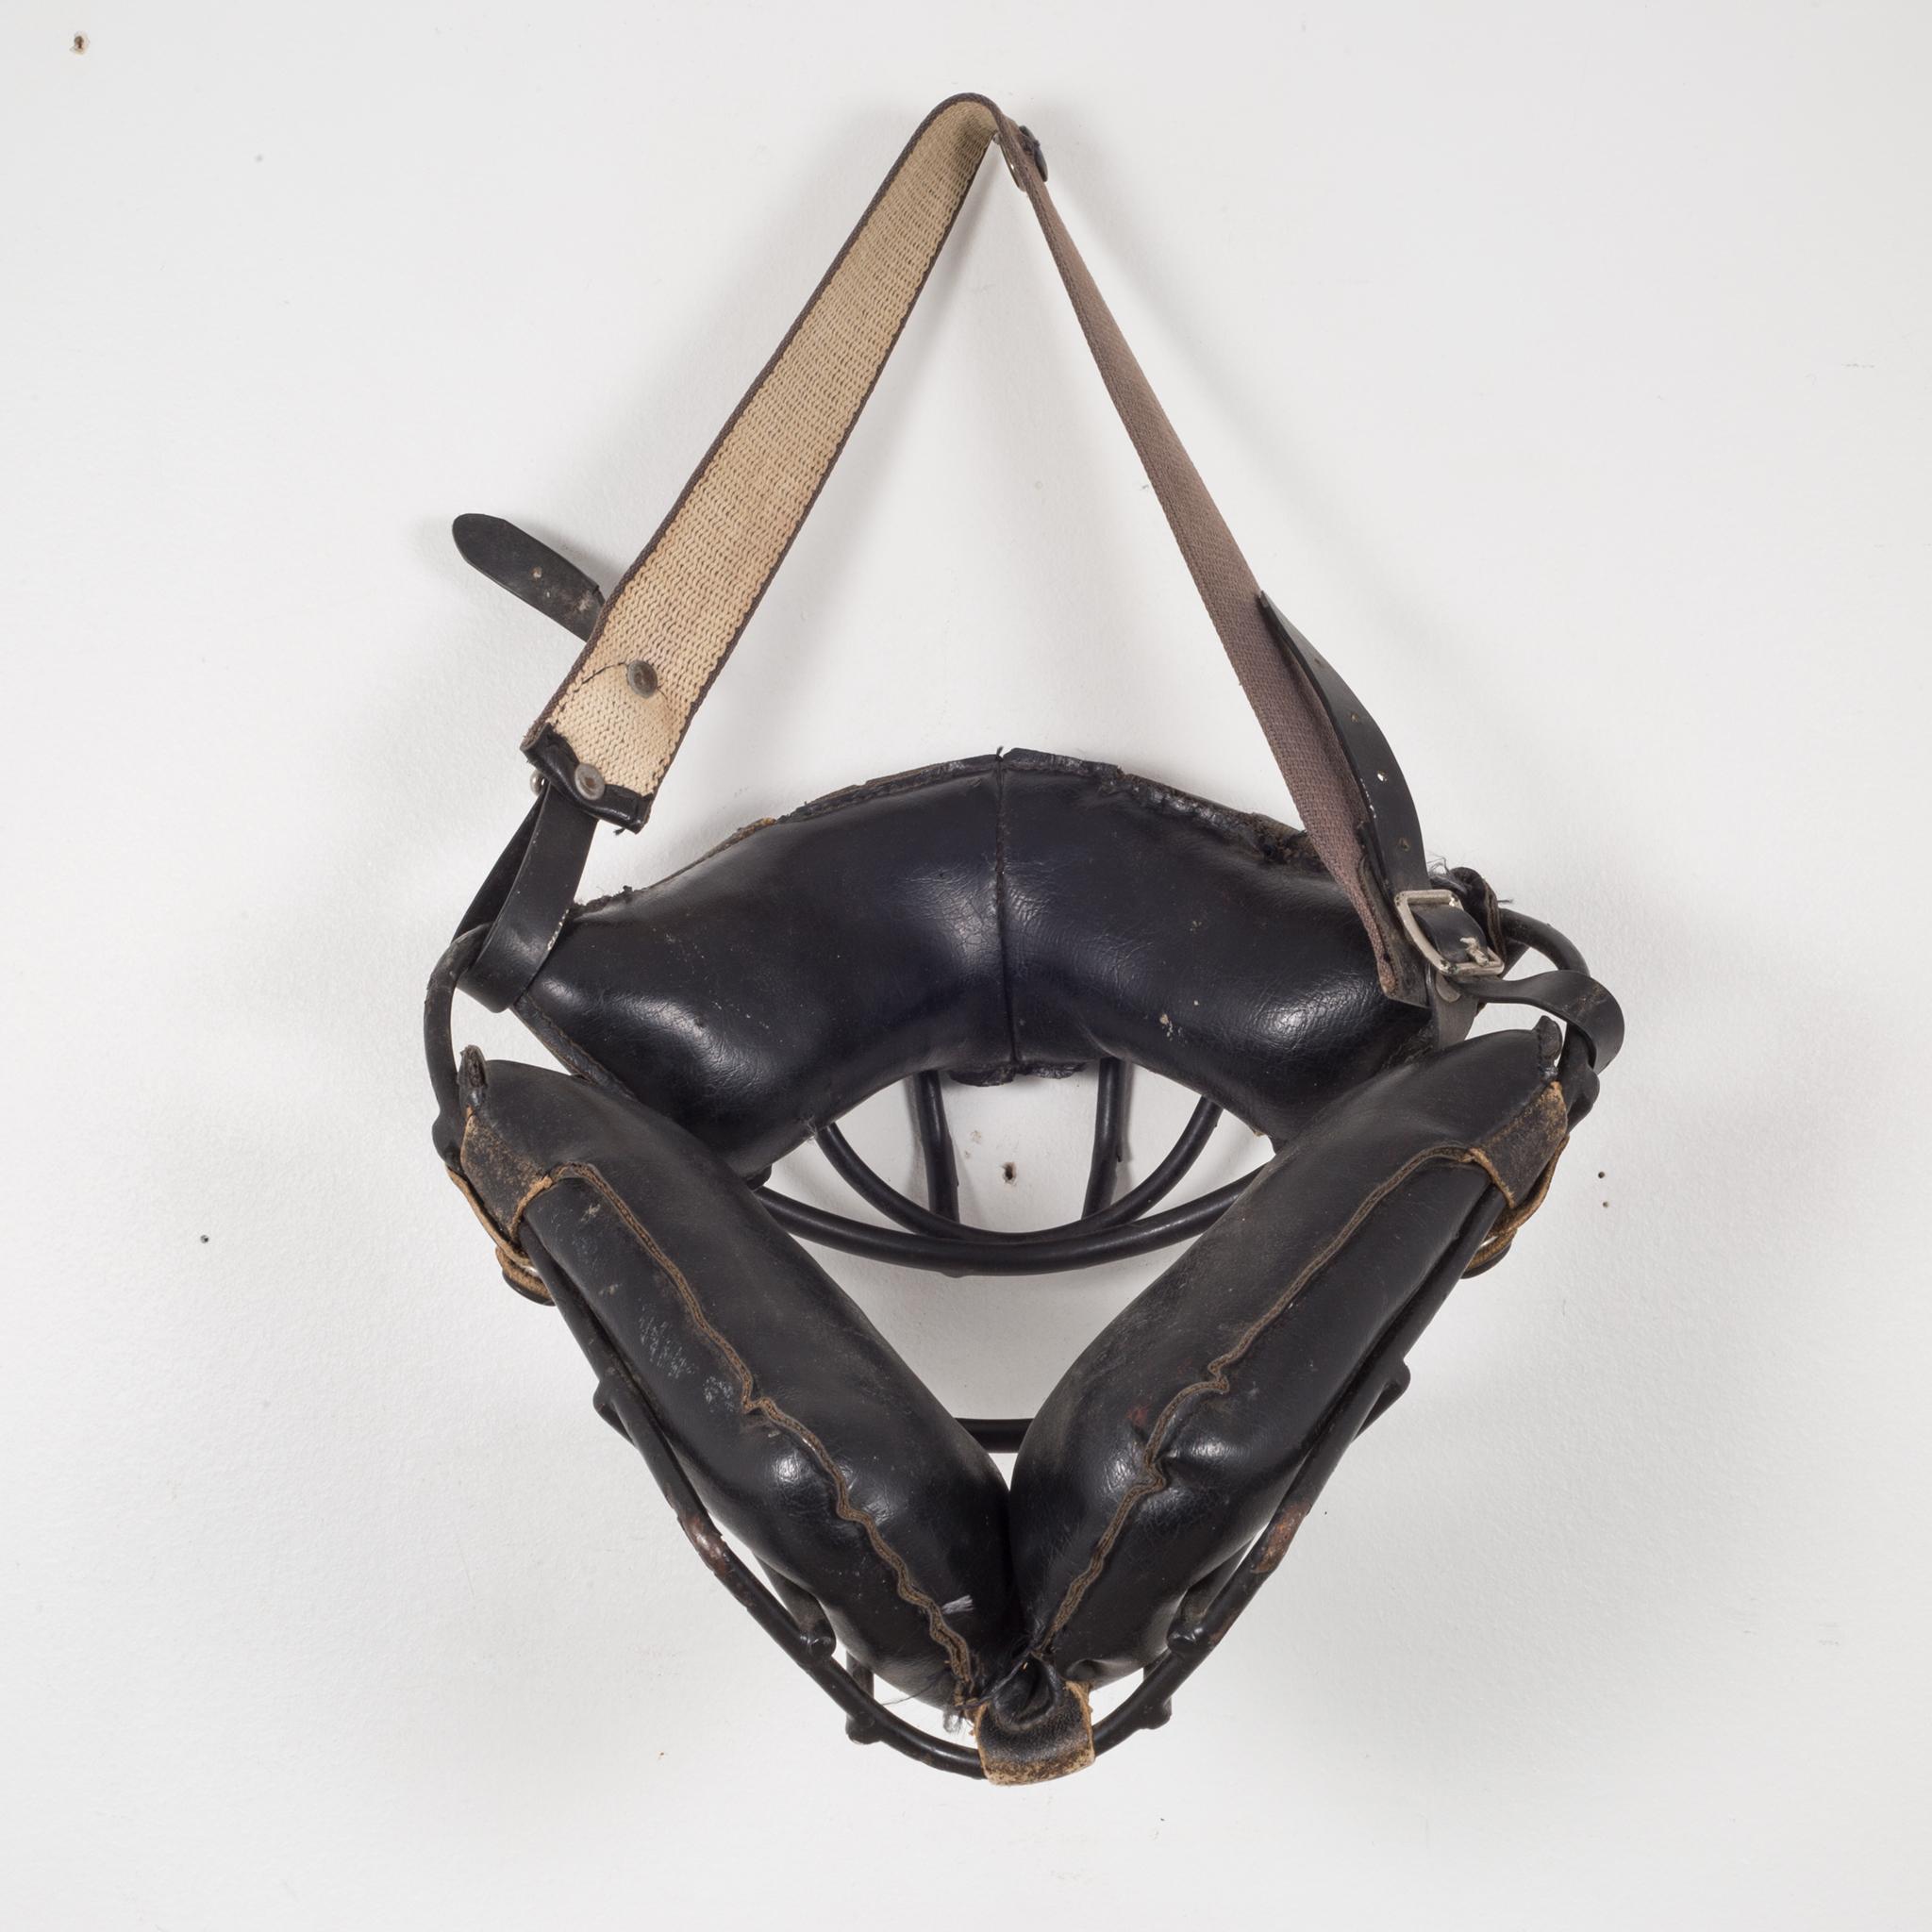 About

This is an original vintage catcher's mask. The main body is steel with thick, black leather padding and fabric head strap. The padding is held onto the body of the mask by leather straps with brass snaps. The piece has retained most of